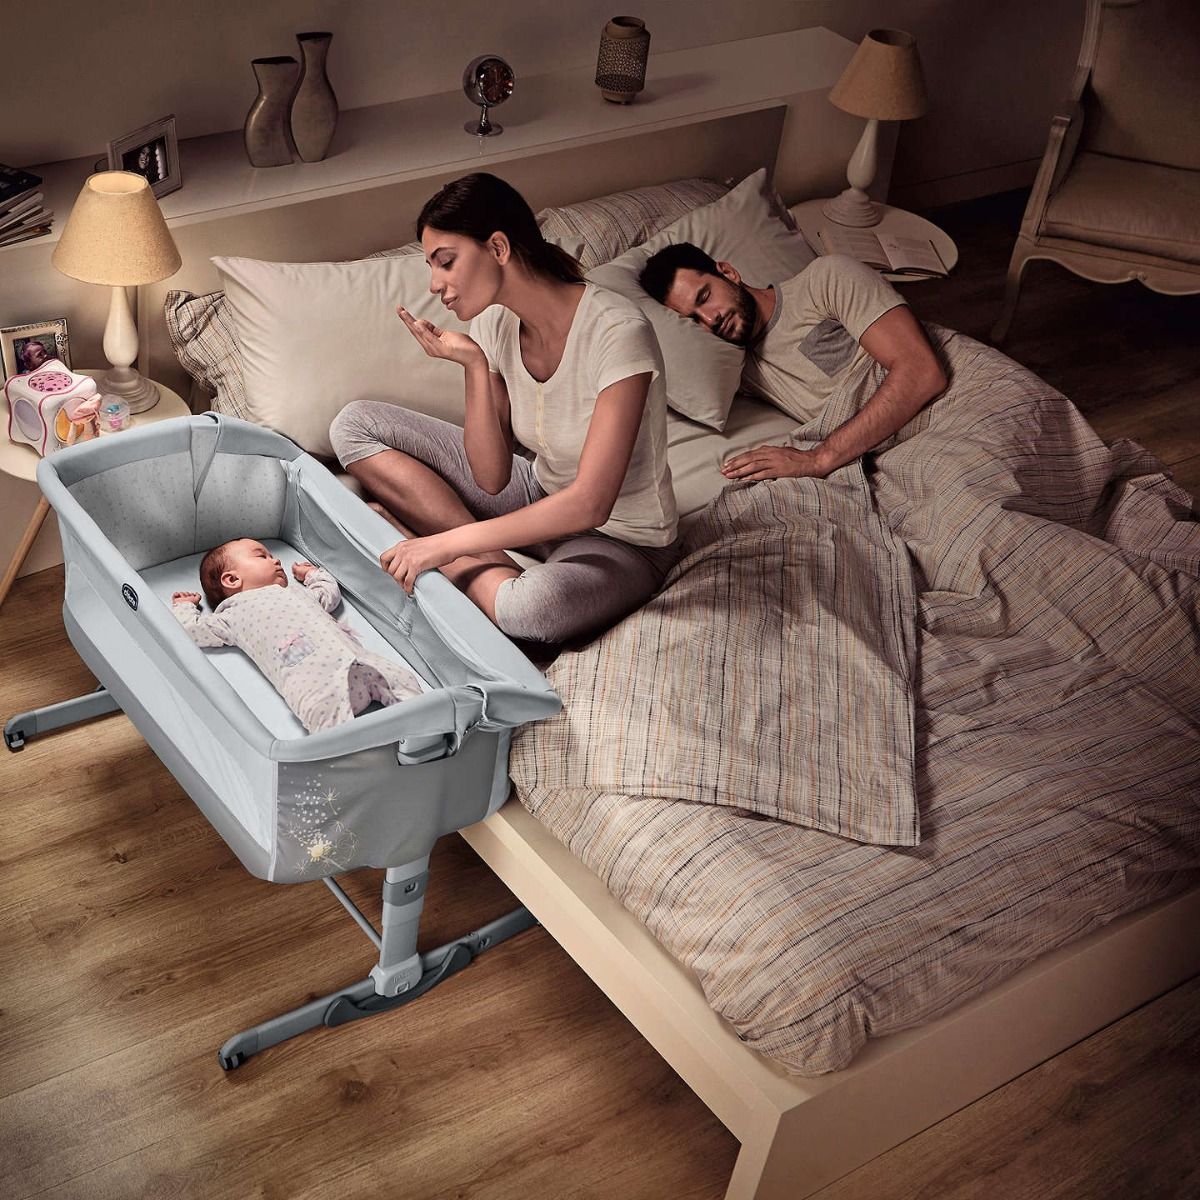 Chicco Next2Me Magic bedside crib review - Cribs & moses baskets - Cots,  night-time & nursery